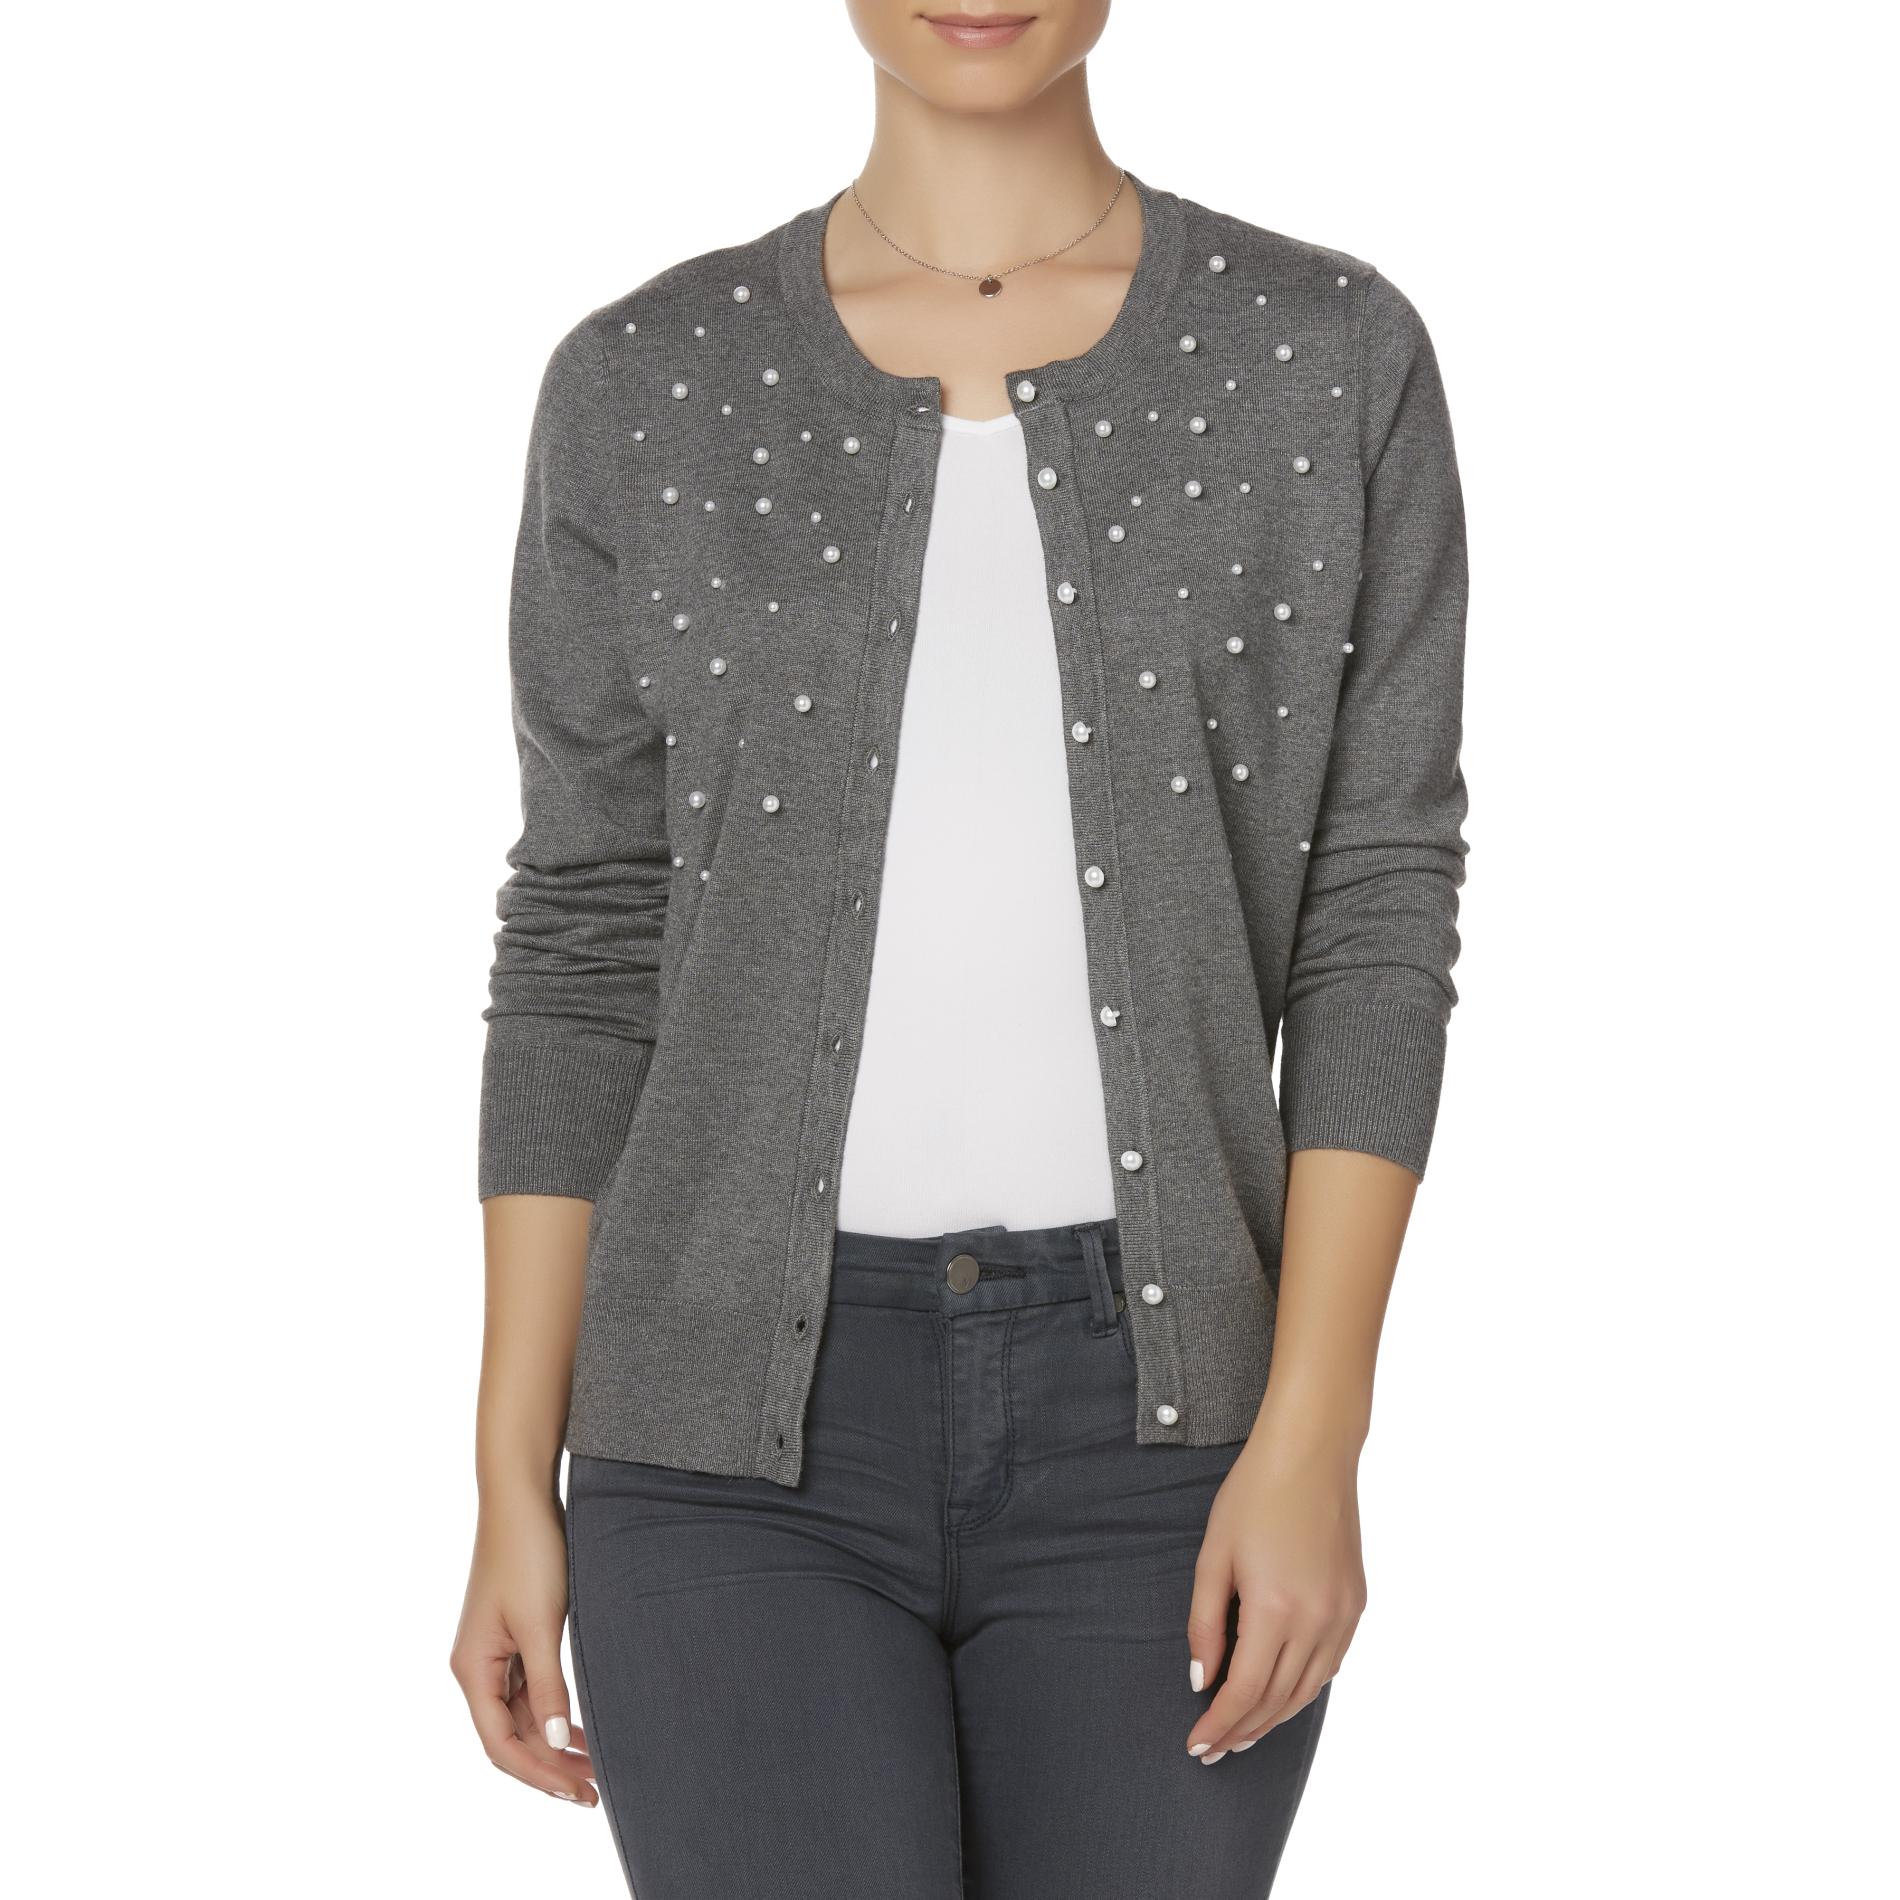 Simply Styled Women's Embellished Cardigan